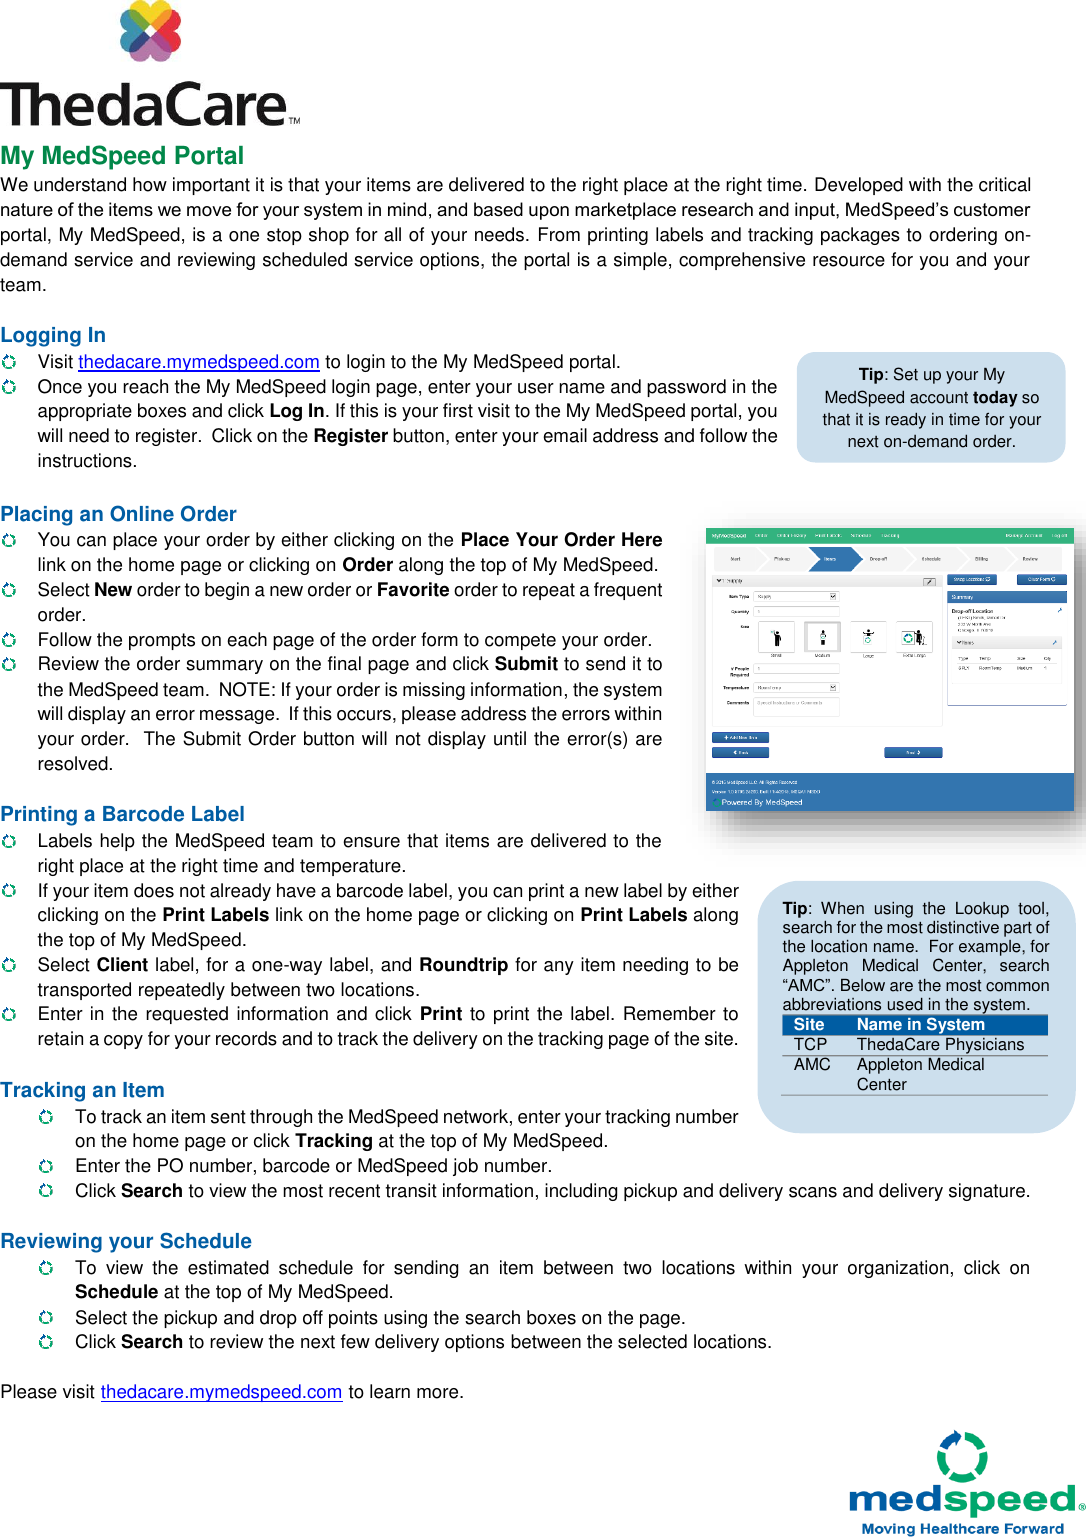 Page 2 of 2 - Theda Care User Guide